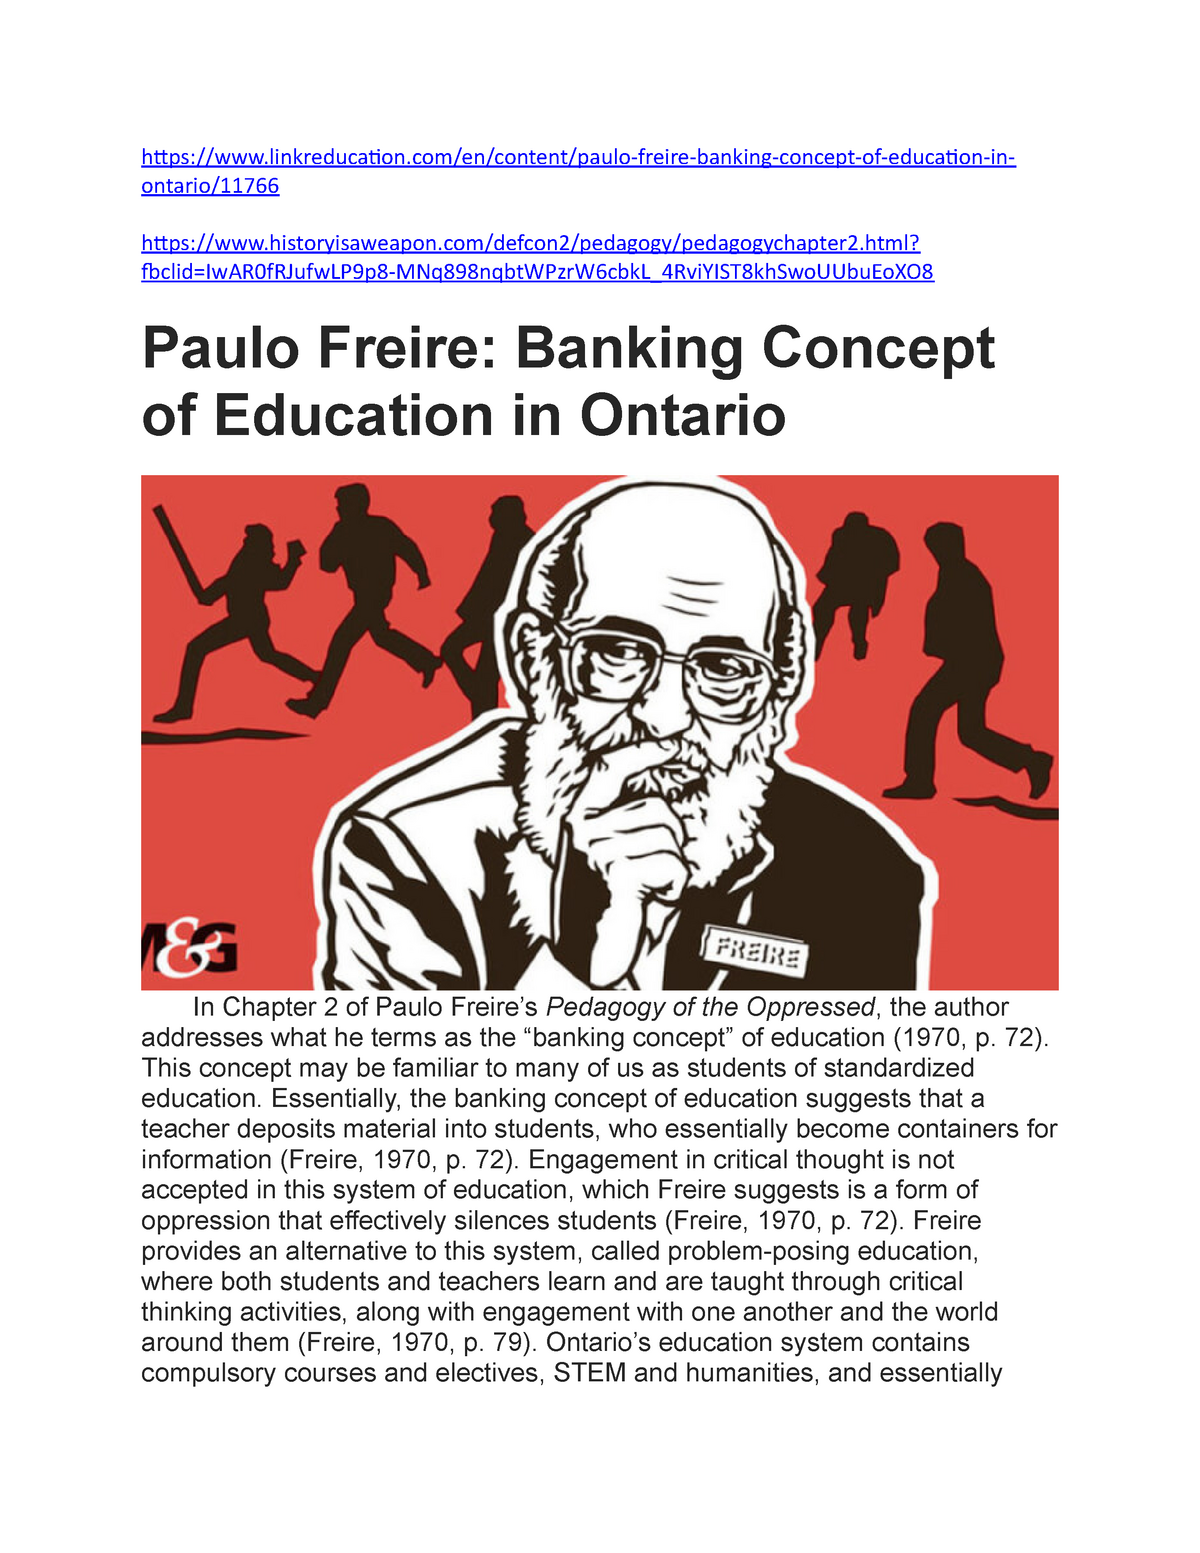 Danny Cottrell on LinkedIn: Fun quiz - Carl Rogers or Paulo Freire? 'In  problem-posing education…